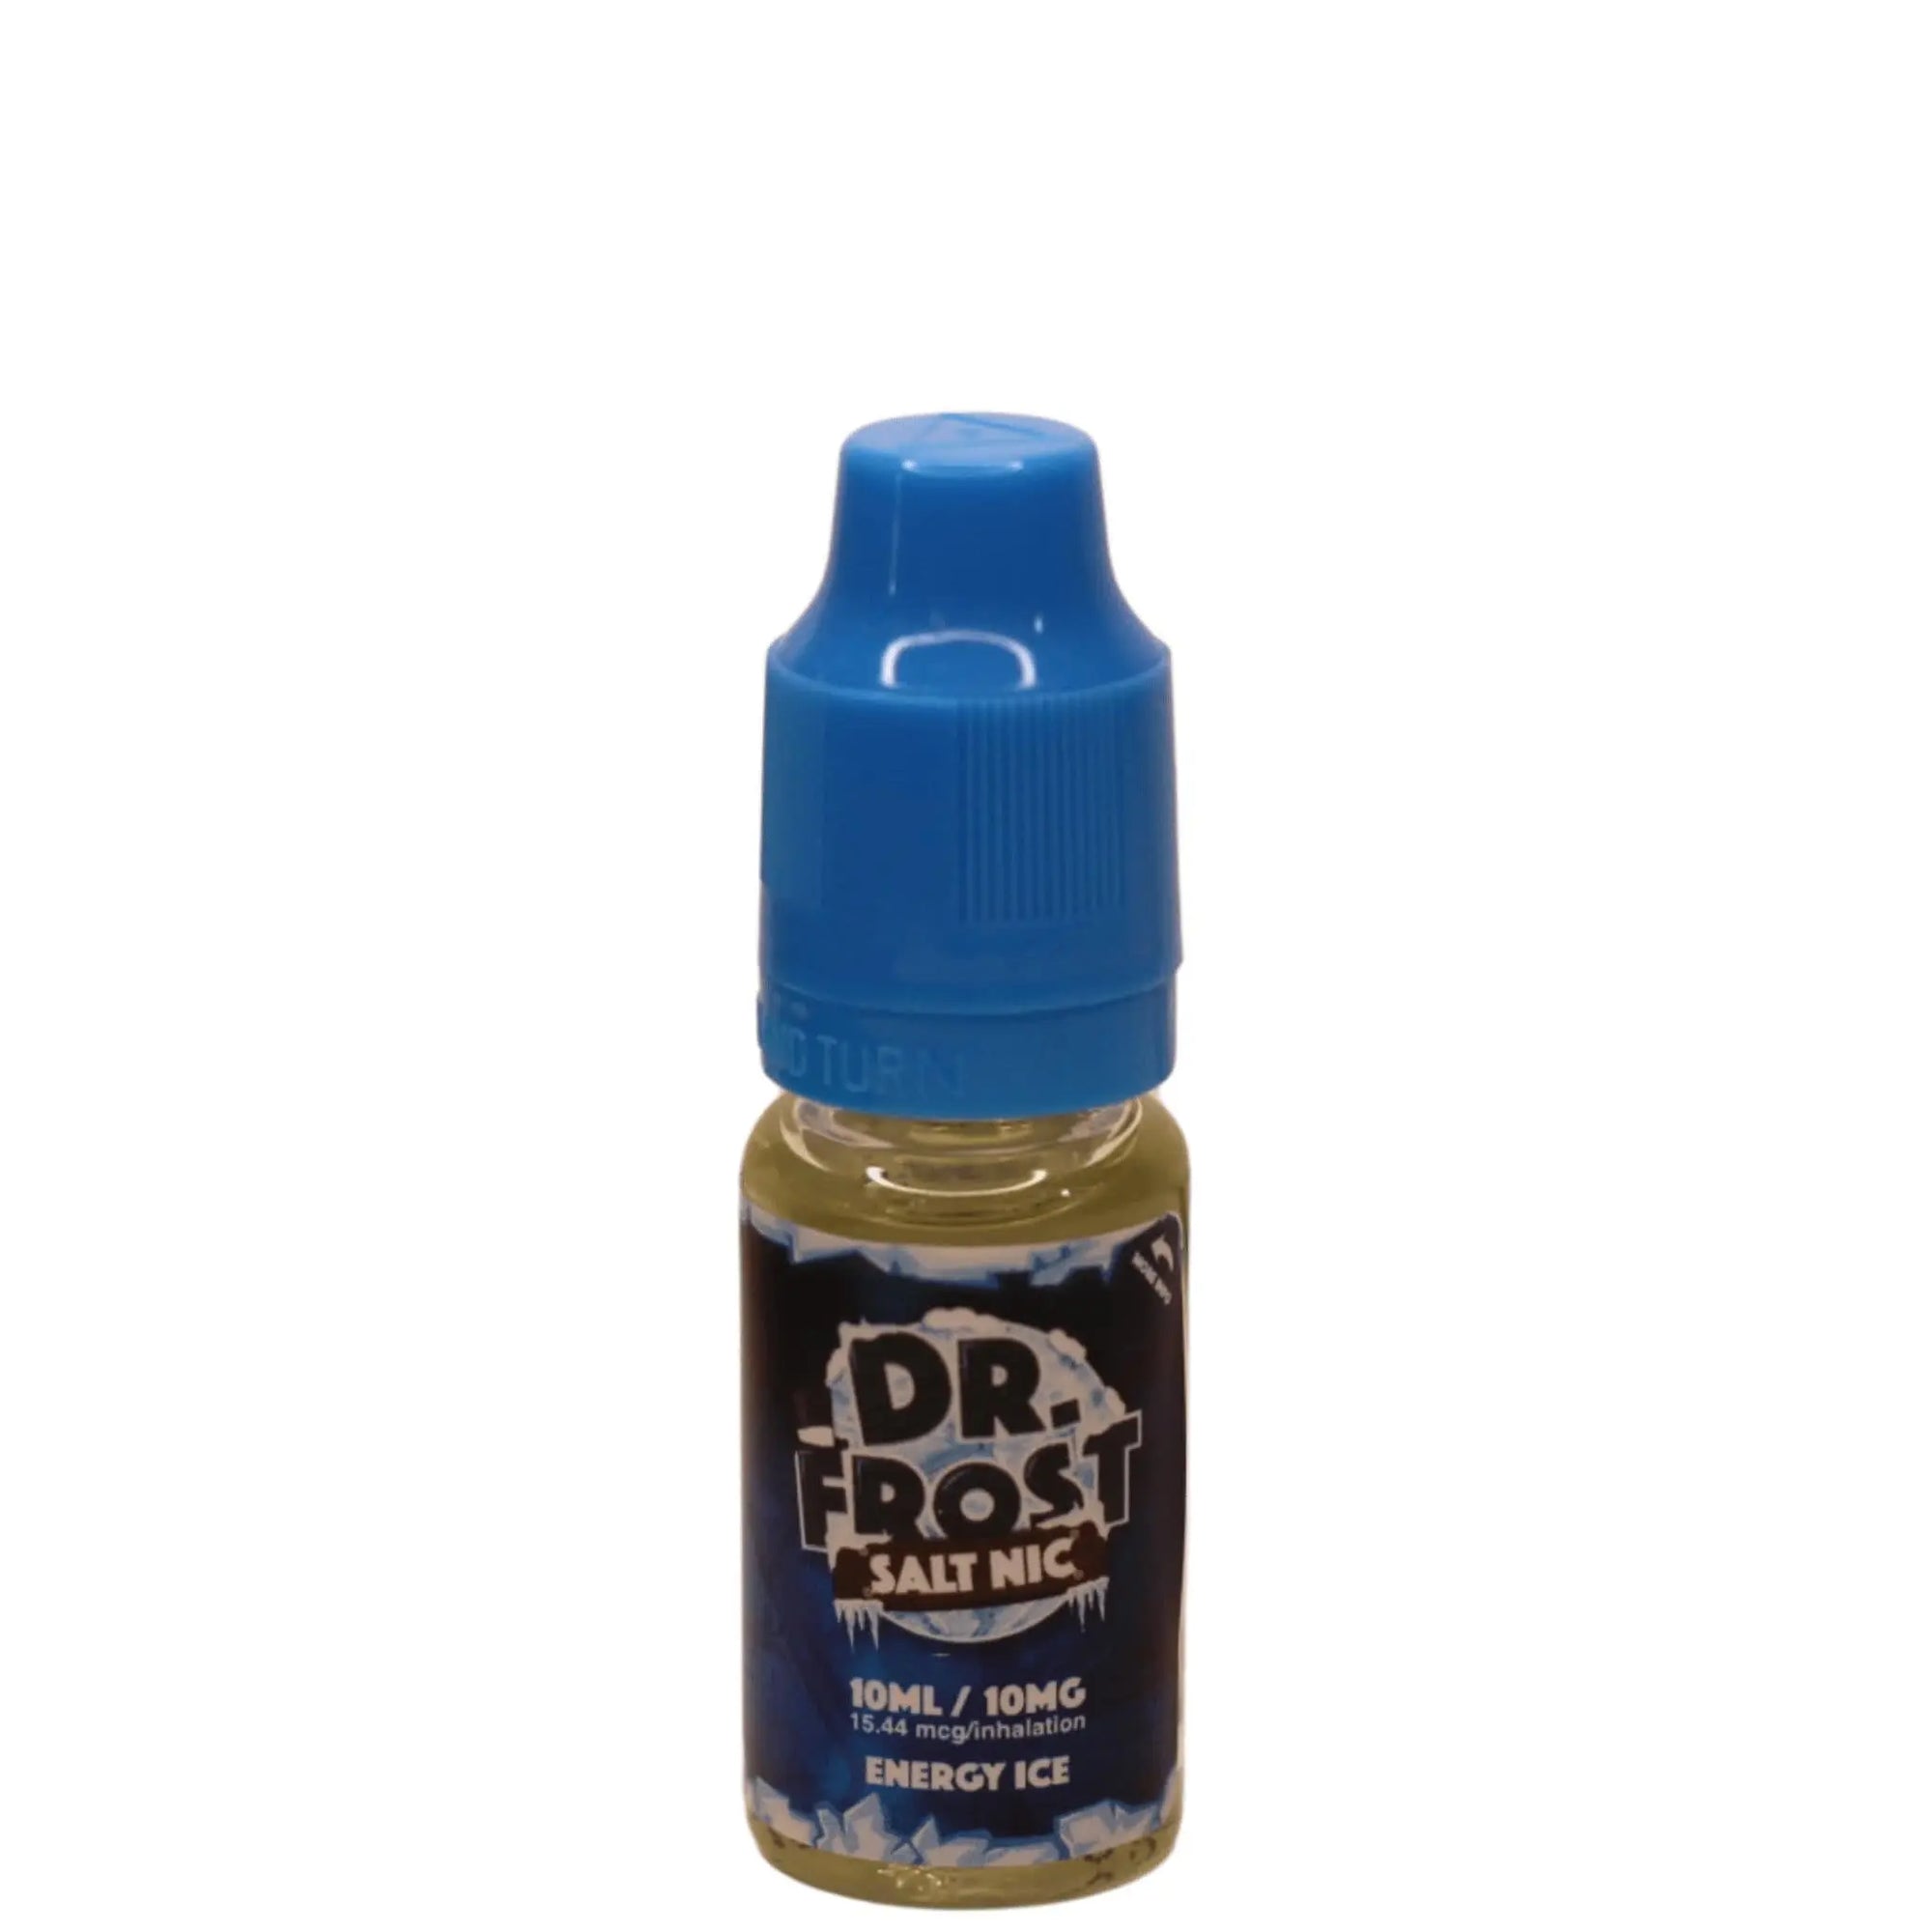 Energy Ice | Dr Frost 10ml Dr Frost 3.99